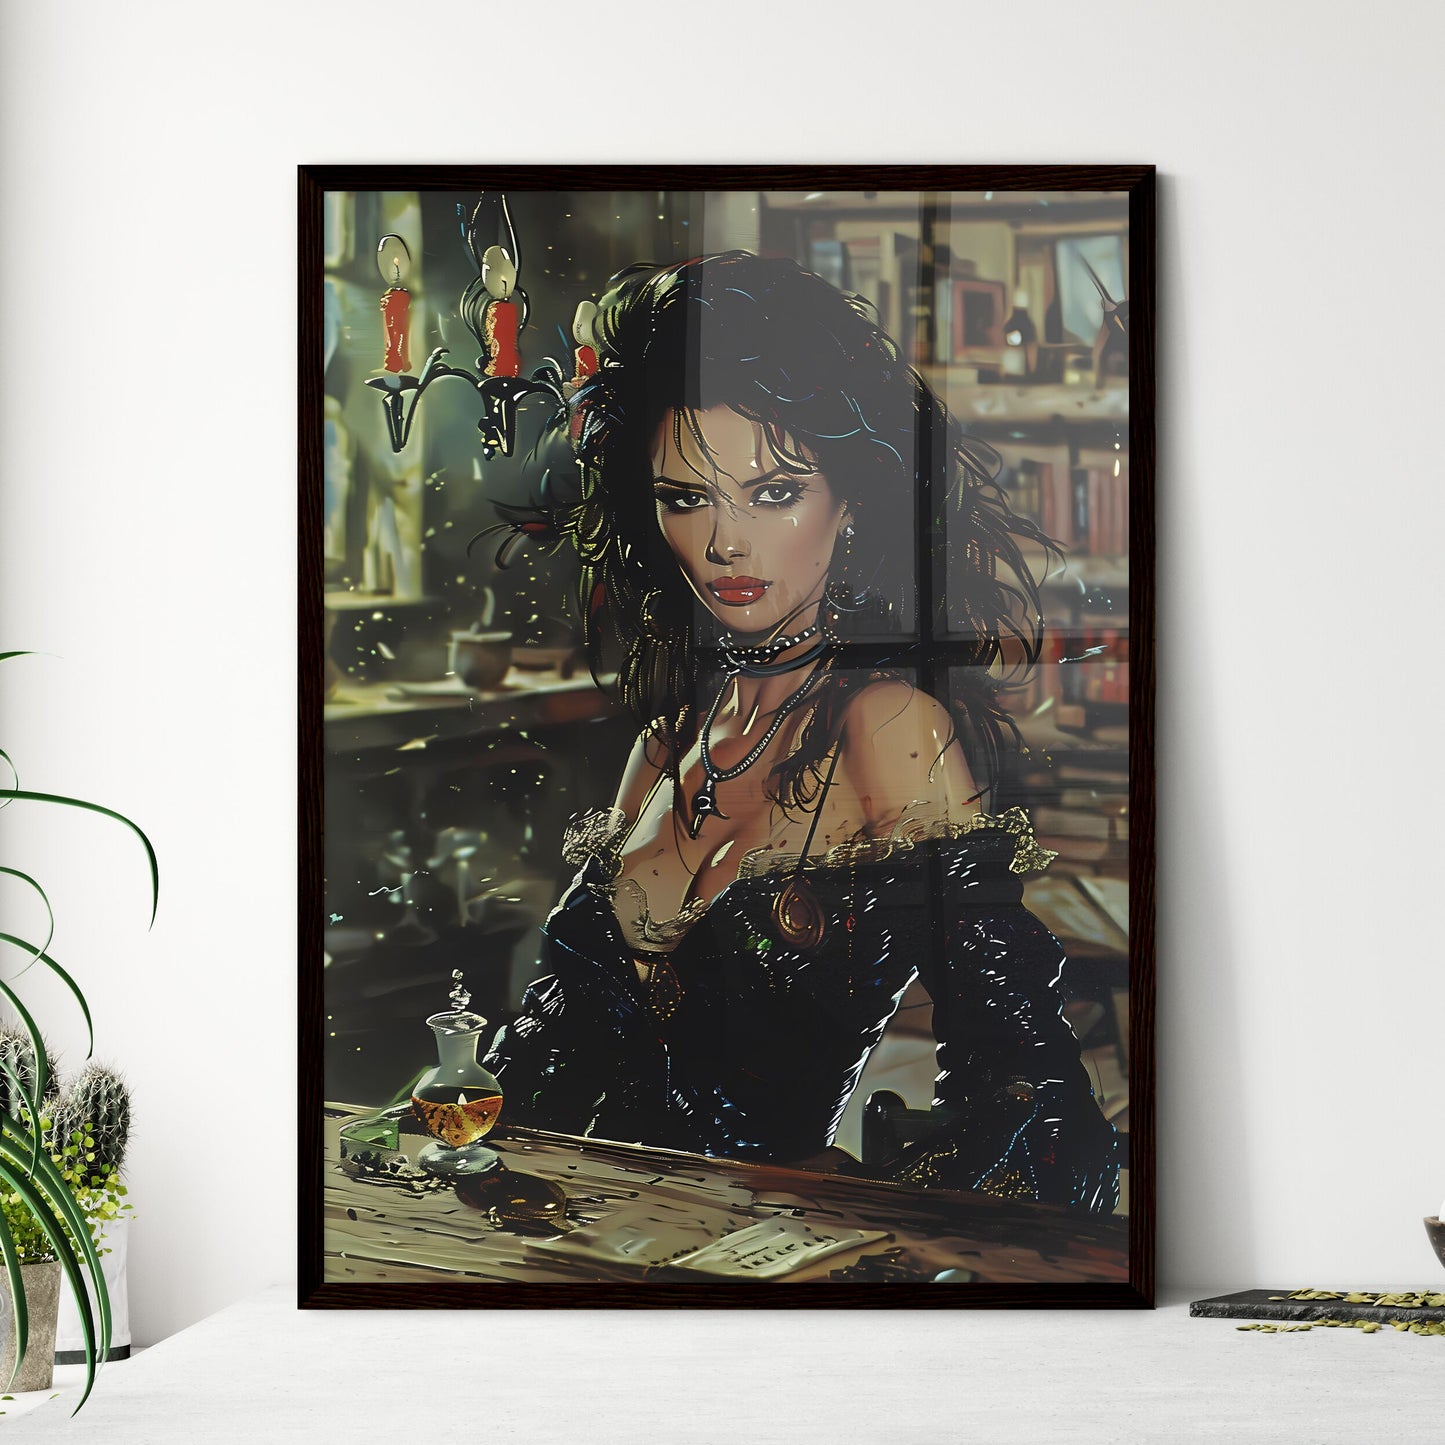 Surreal Gothic Horror: Vibrant Witchy Portrait in an Apothecary Library with Moody Lighting and a Nightmarish Ambiance in Italian Horror Movie Poster Style Default Title